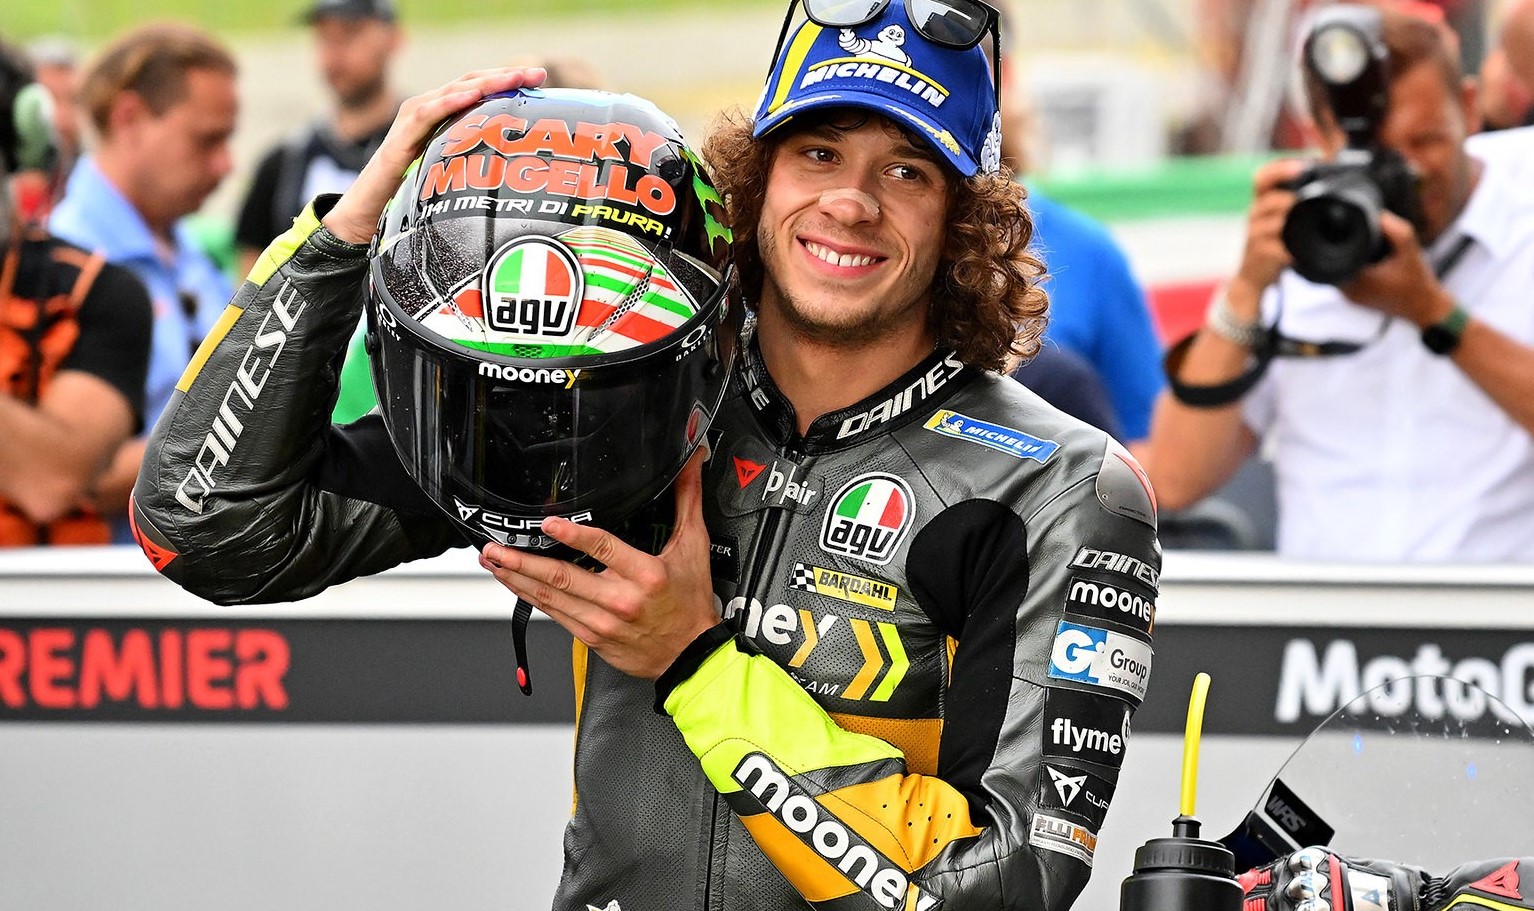 VR46 retains Bezzecchi for 2023 after announcing contract extension